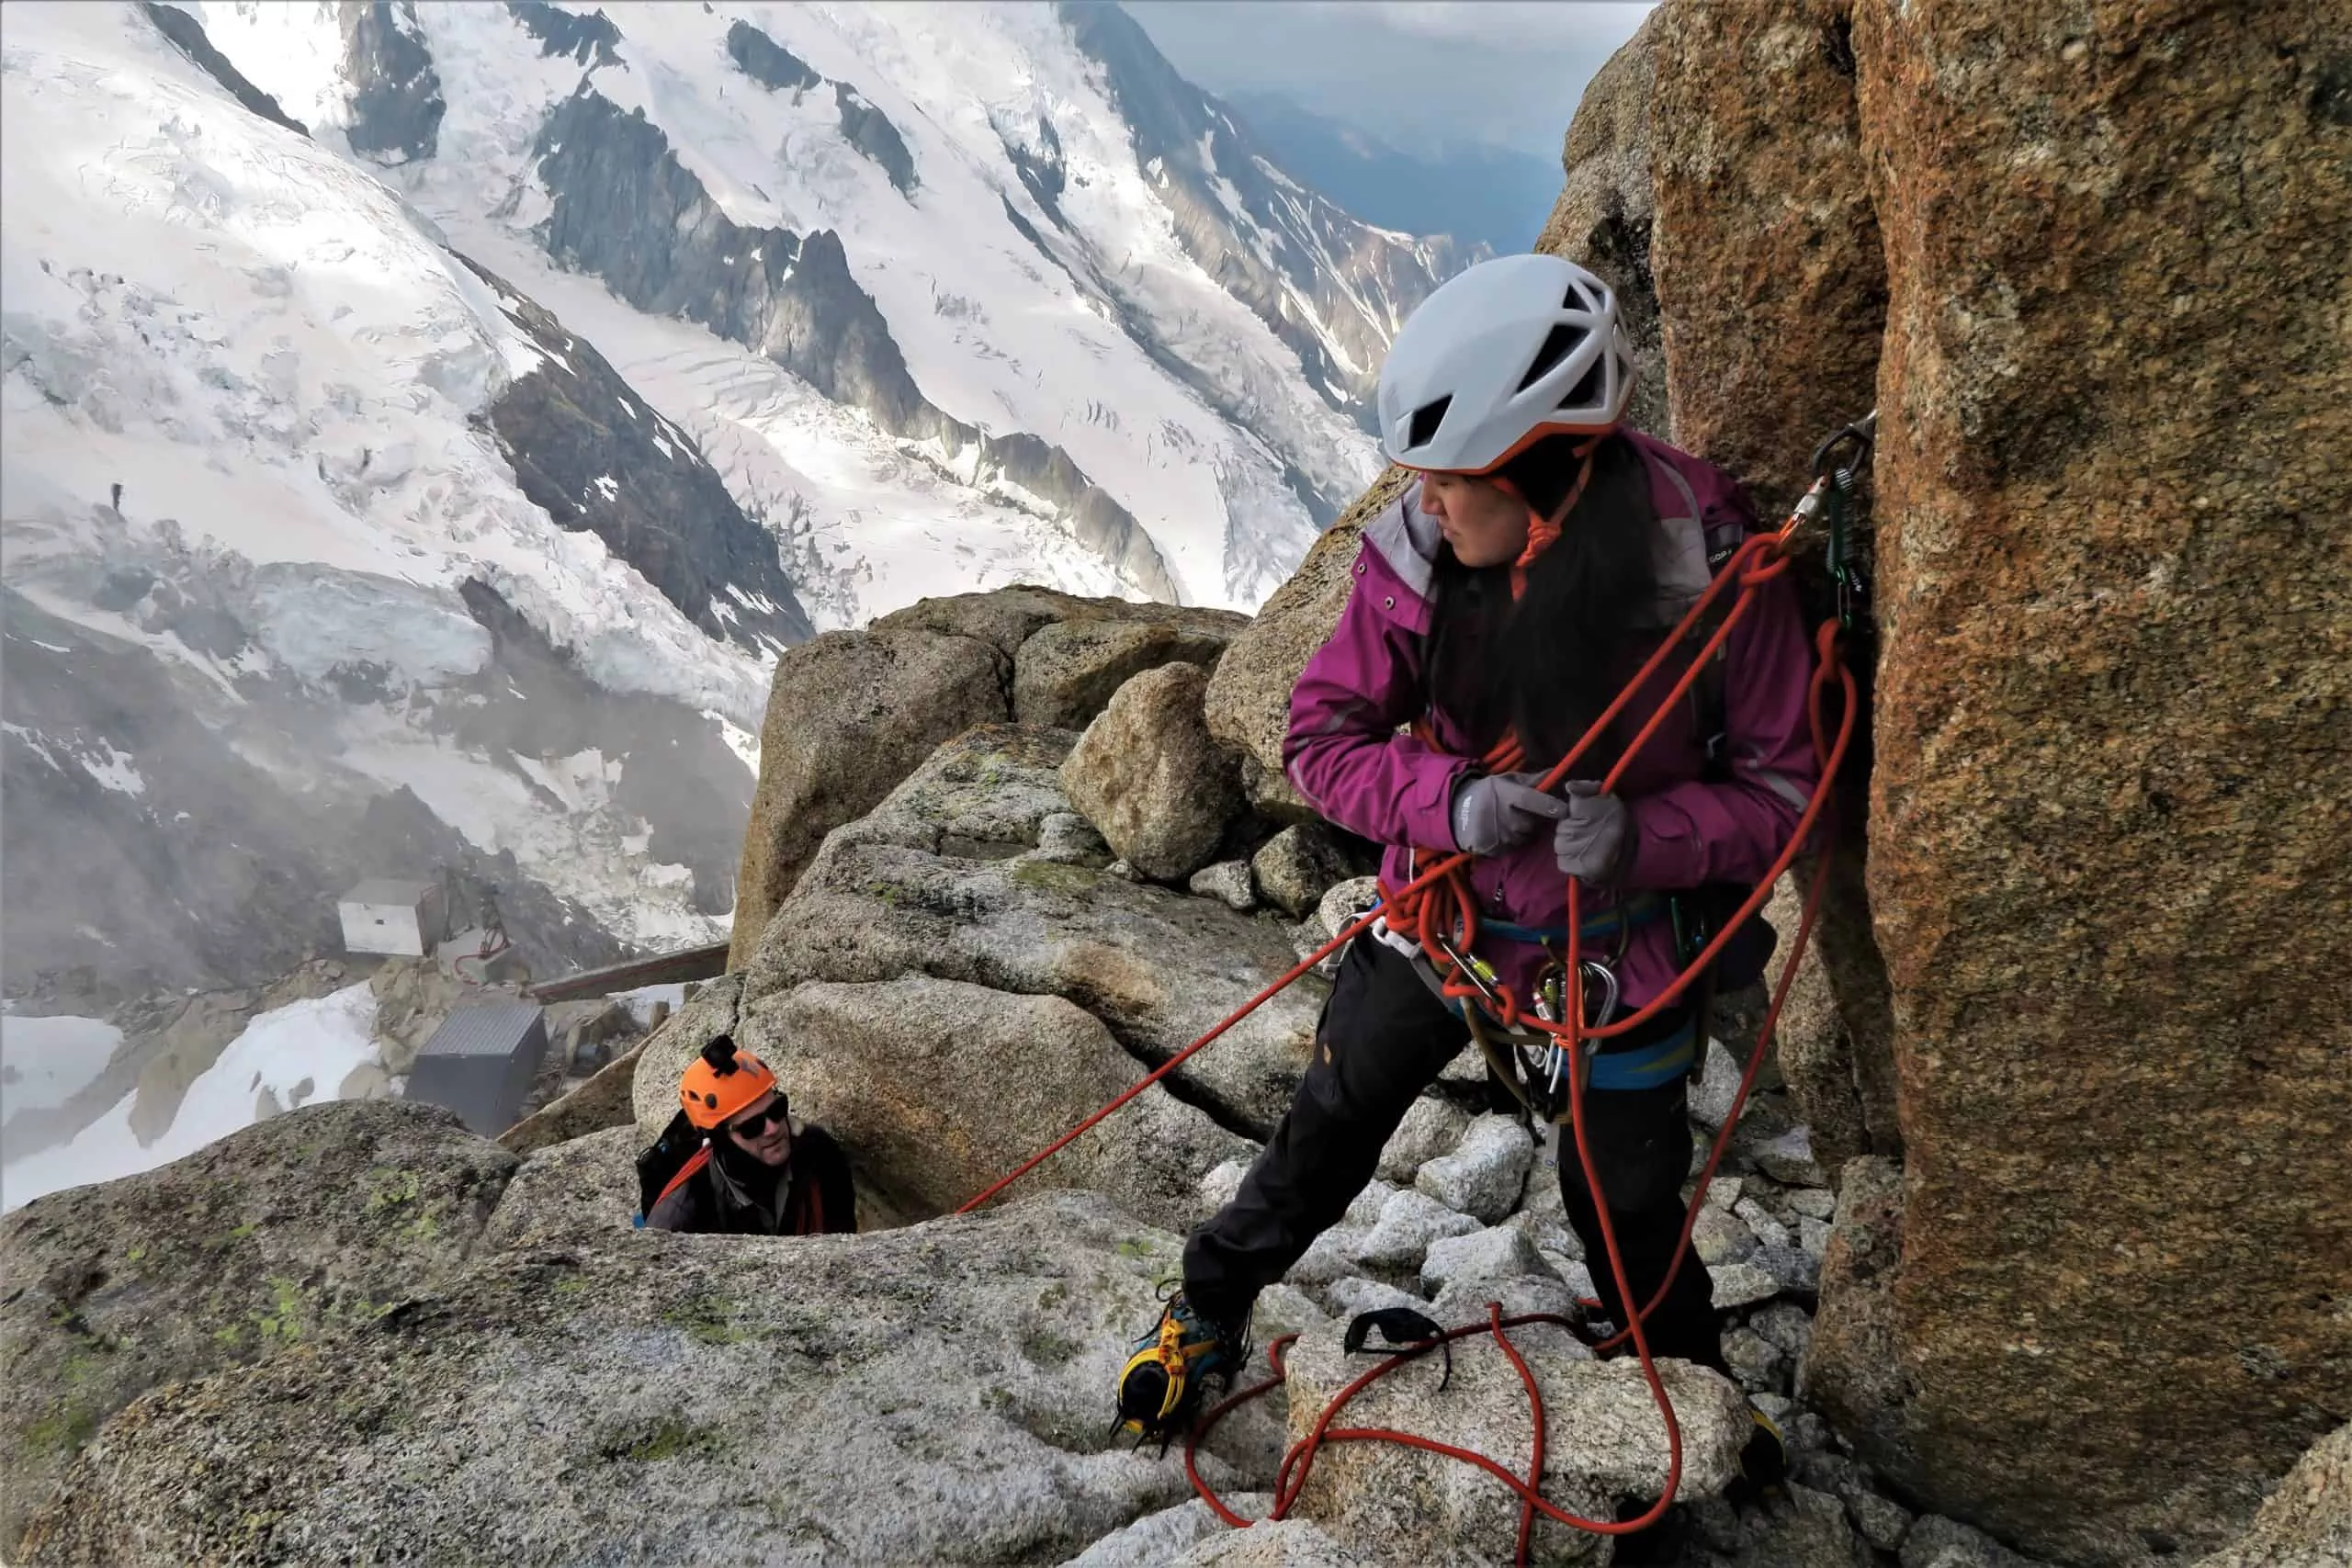 Chamonix Experience in France, Europe | Climbing - Rated 1.1